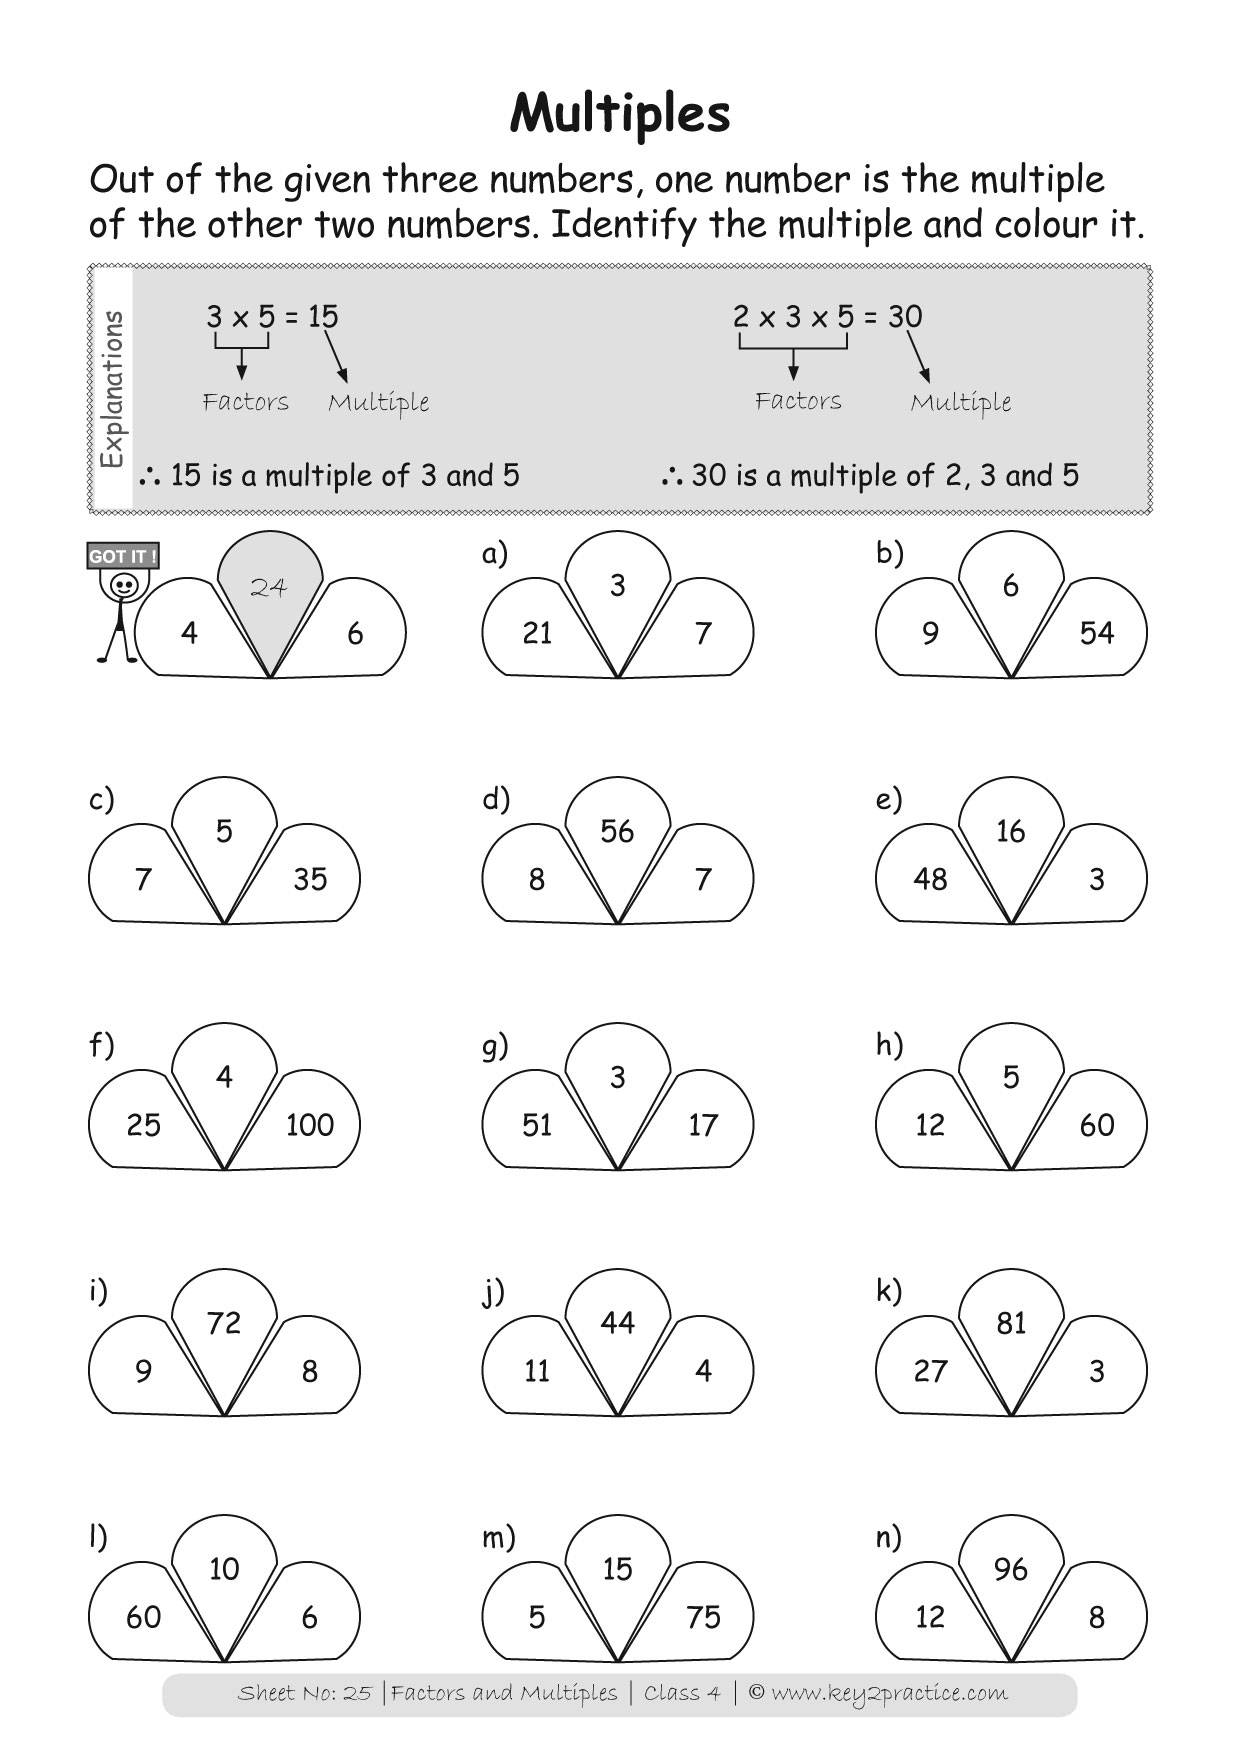 Worksheet Of Factors And Multiples For Class 4th